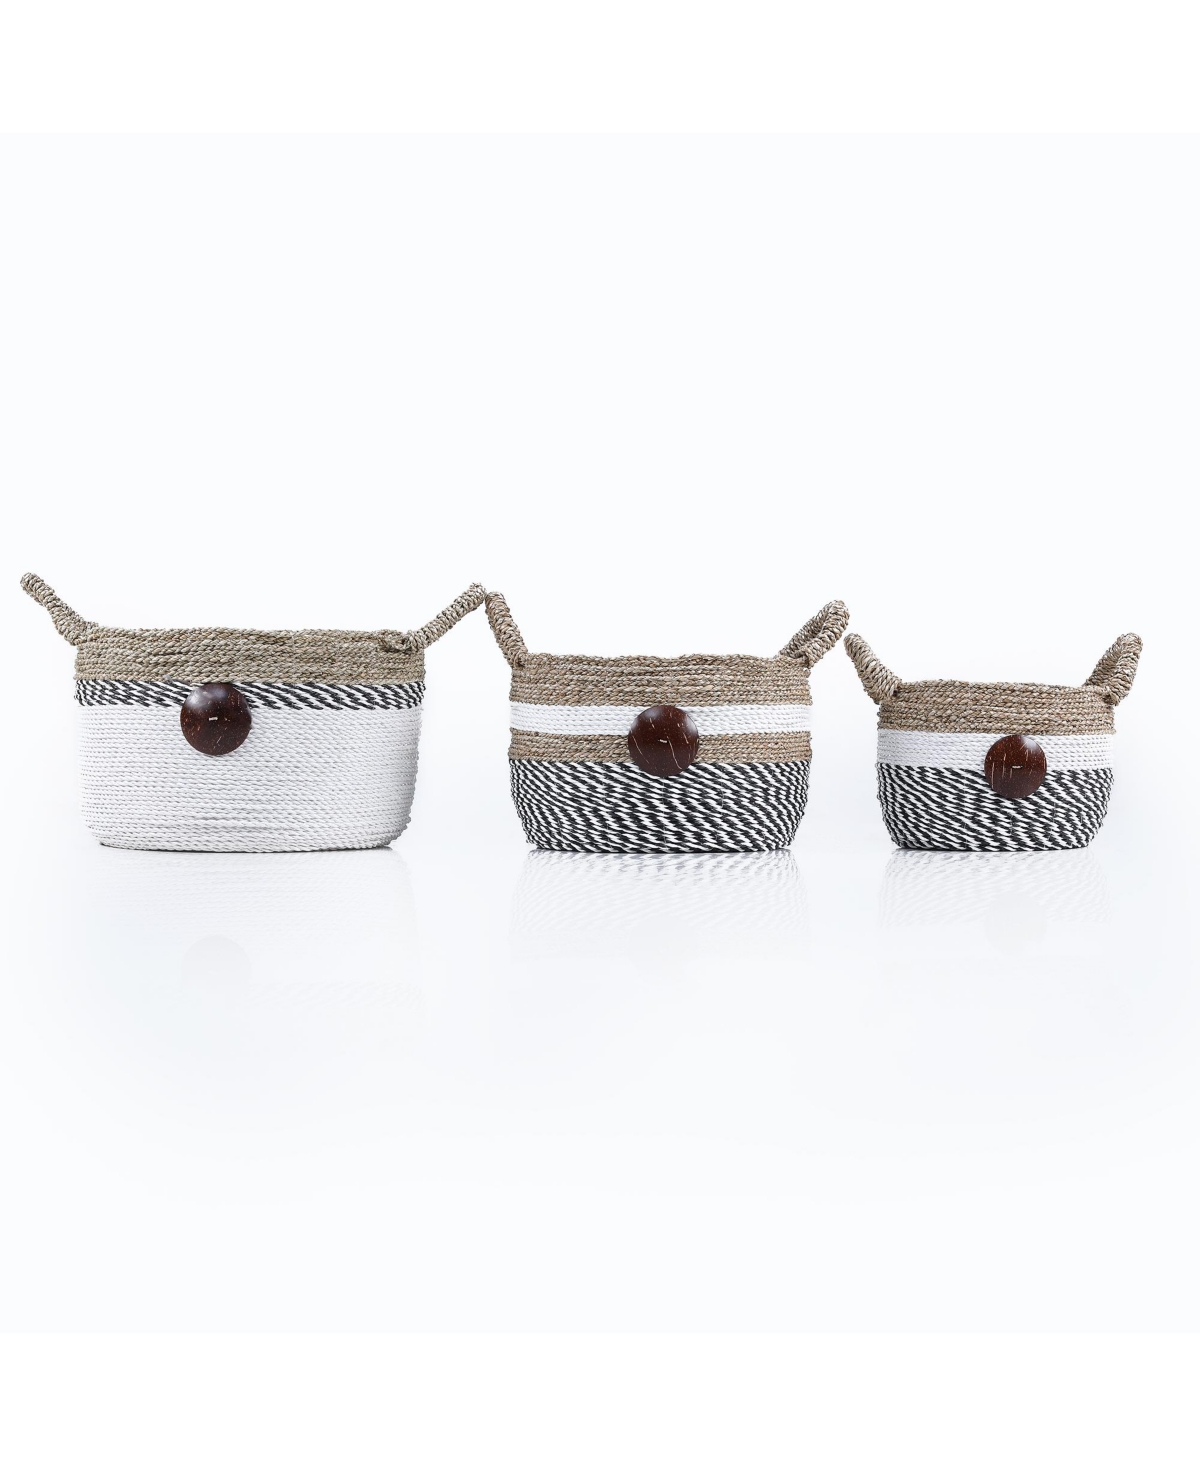 Baum 3 Piece Raffia And Sea Grass Storage Set With Coco Buttons And Ear Handles In Natural